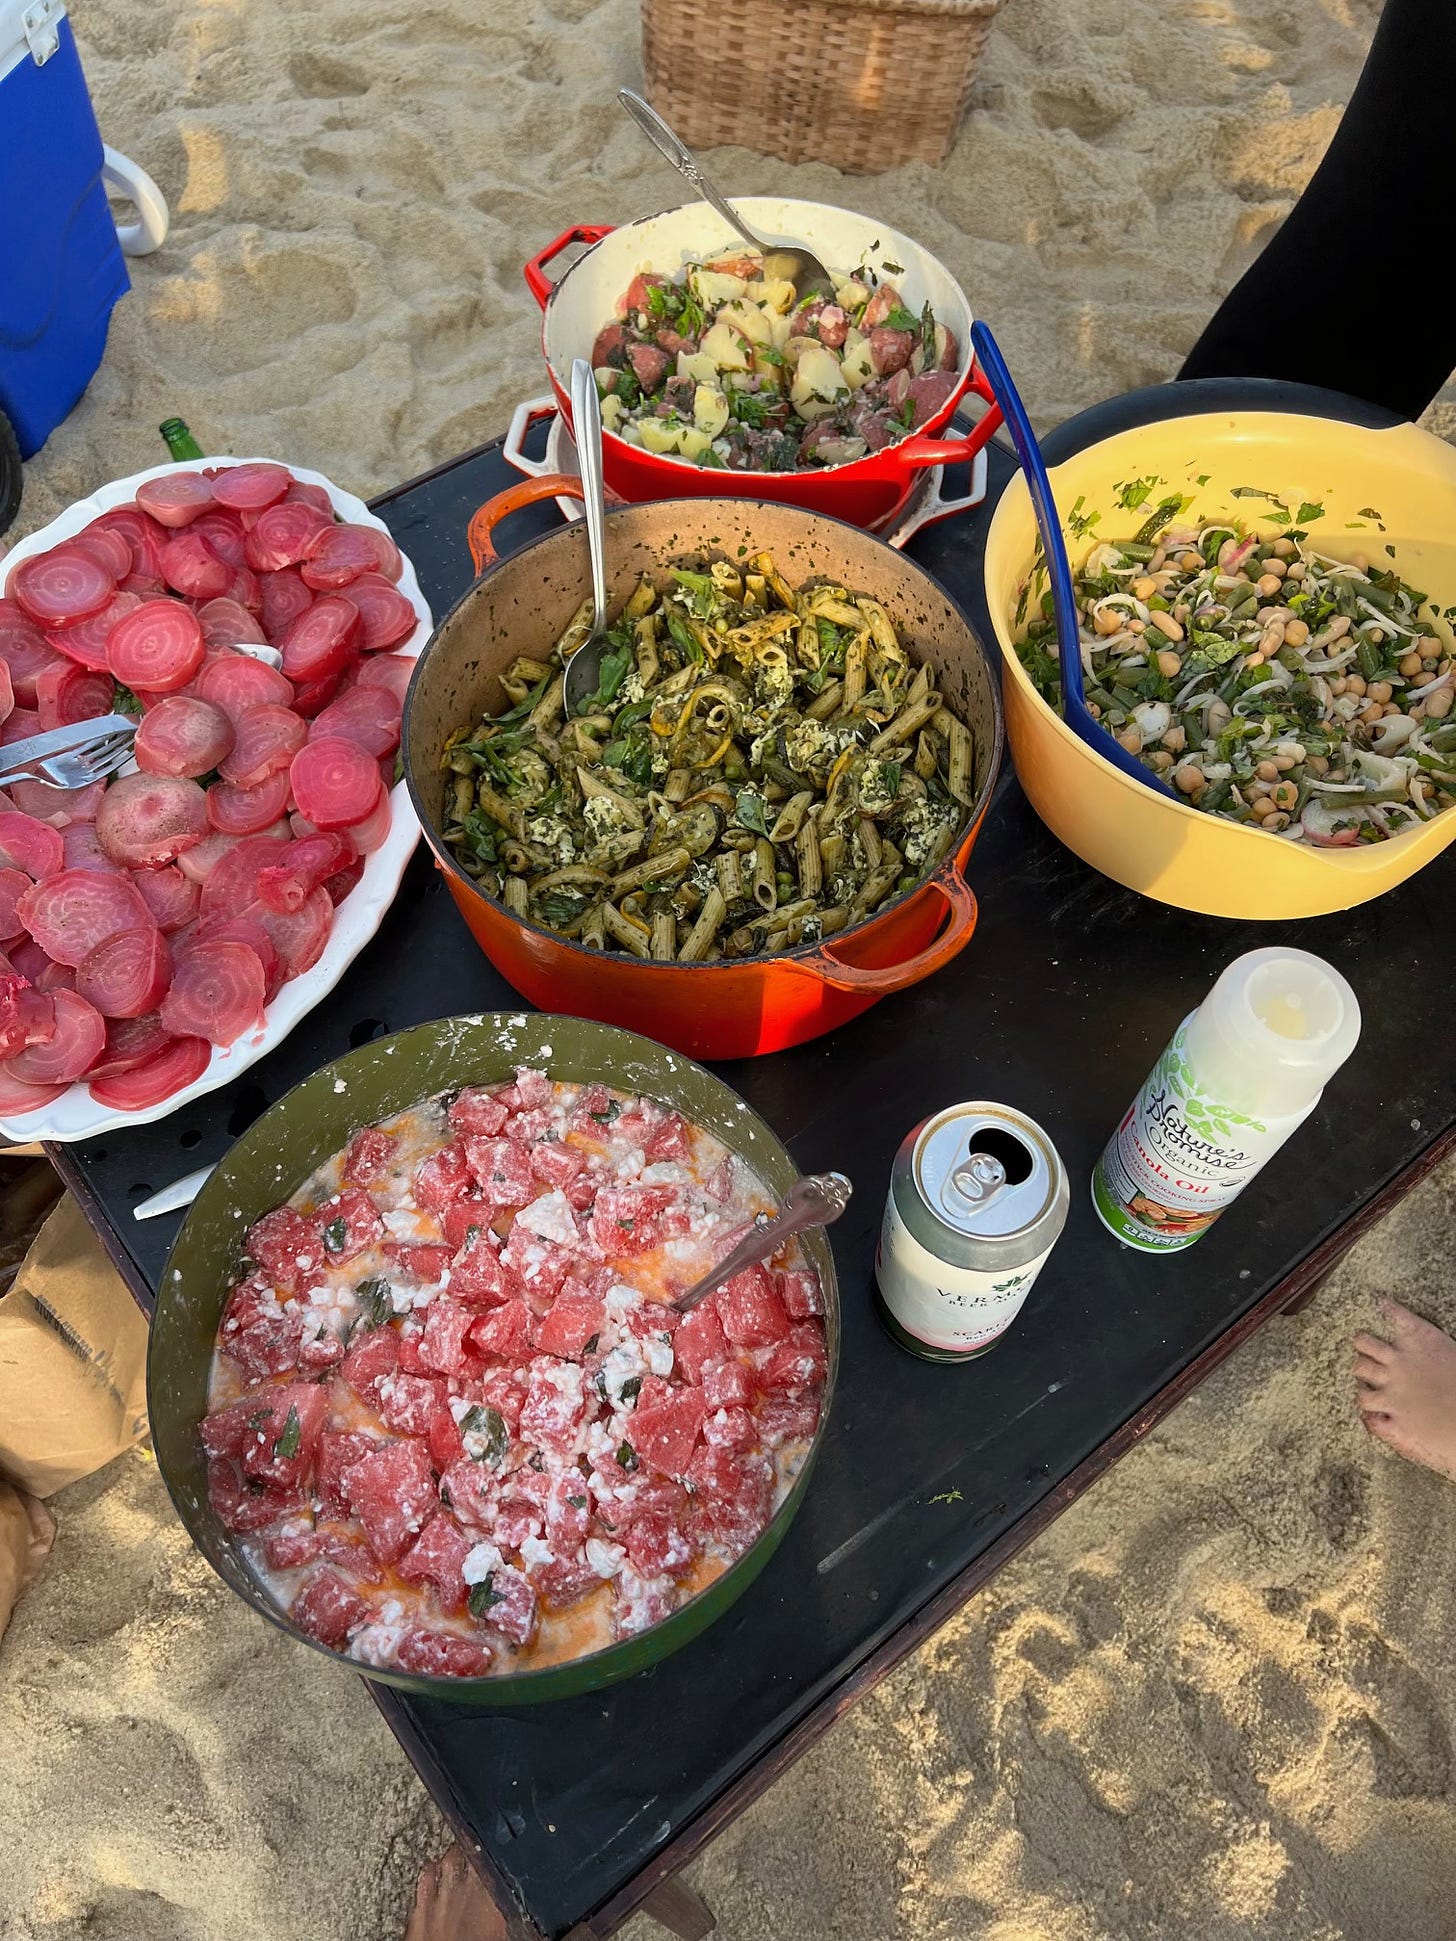 A card table on the beach holding five large bowls of salad: a platter of sliced beets, a pasta salad, a potato salad, a three bean salad, and a watermelon salad.